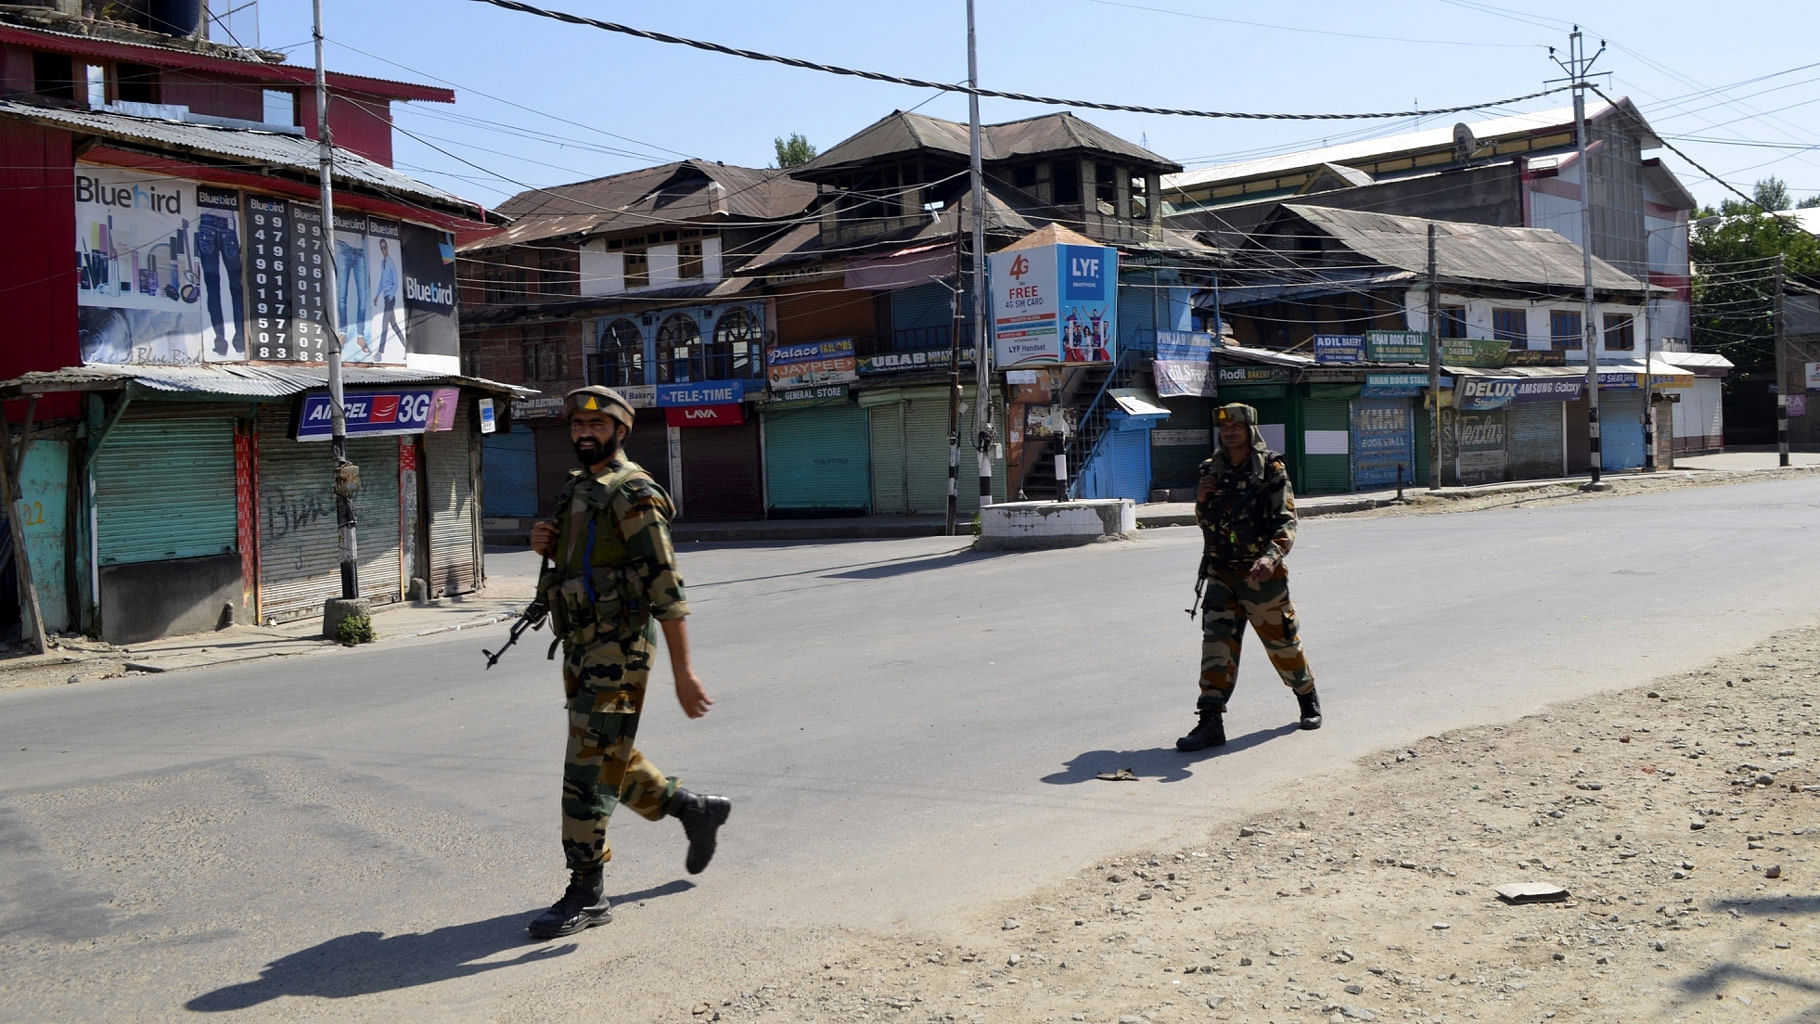 

 Soldiers patrol on Baramulla roads amidst curfew imposed in Kashmir valley,  5 August, 2016. (Photo: IANS)